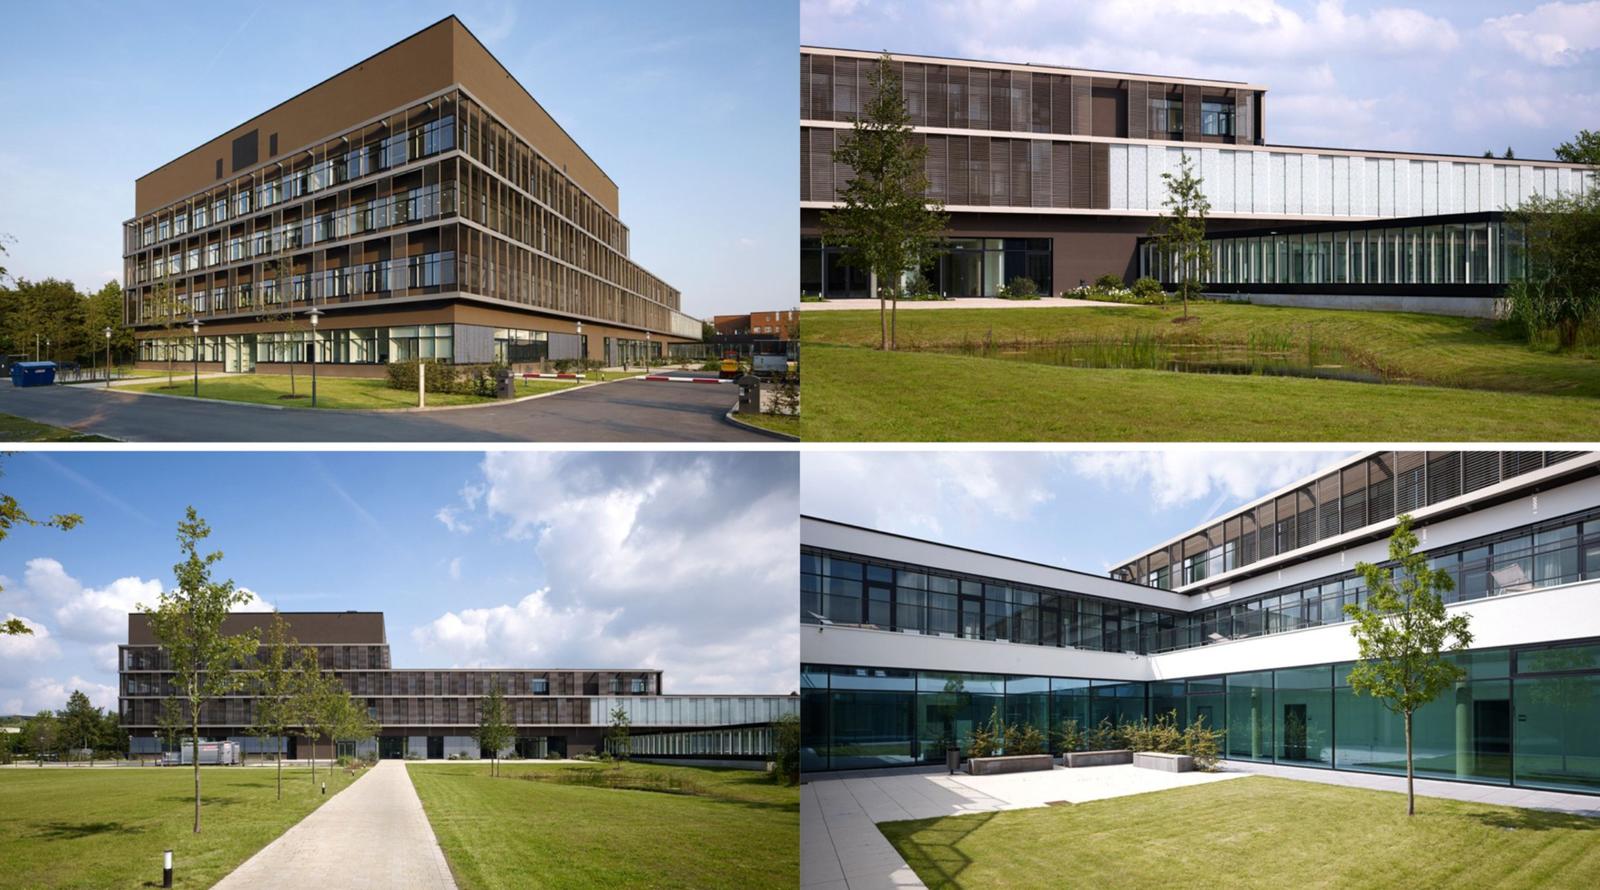 P-ID:74-Clinical Research Center, Fraunhofer Institut Hannover